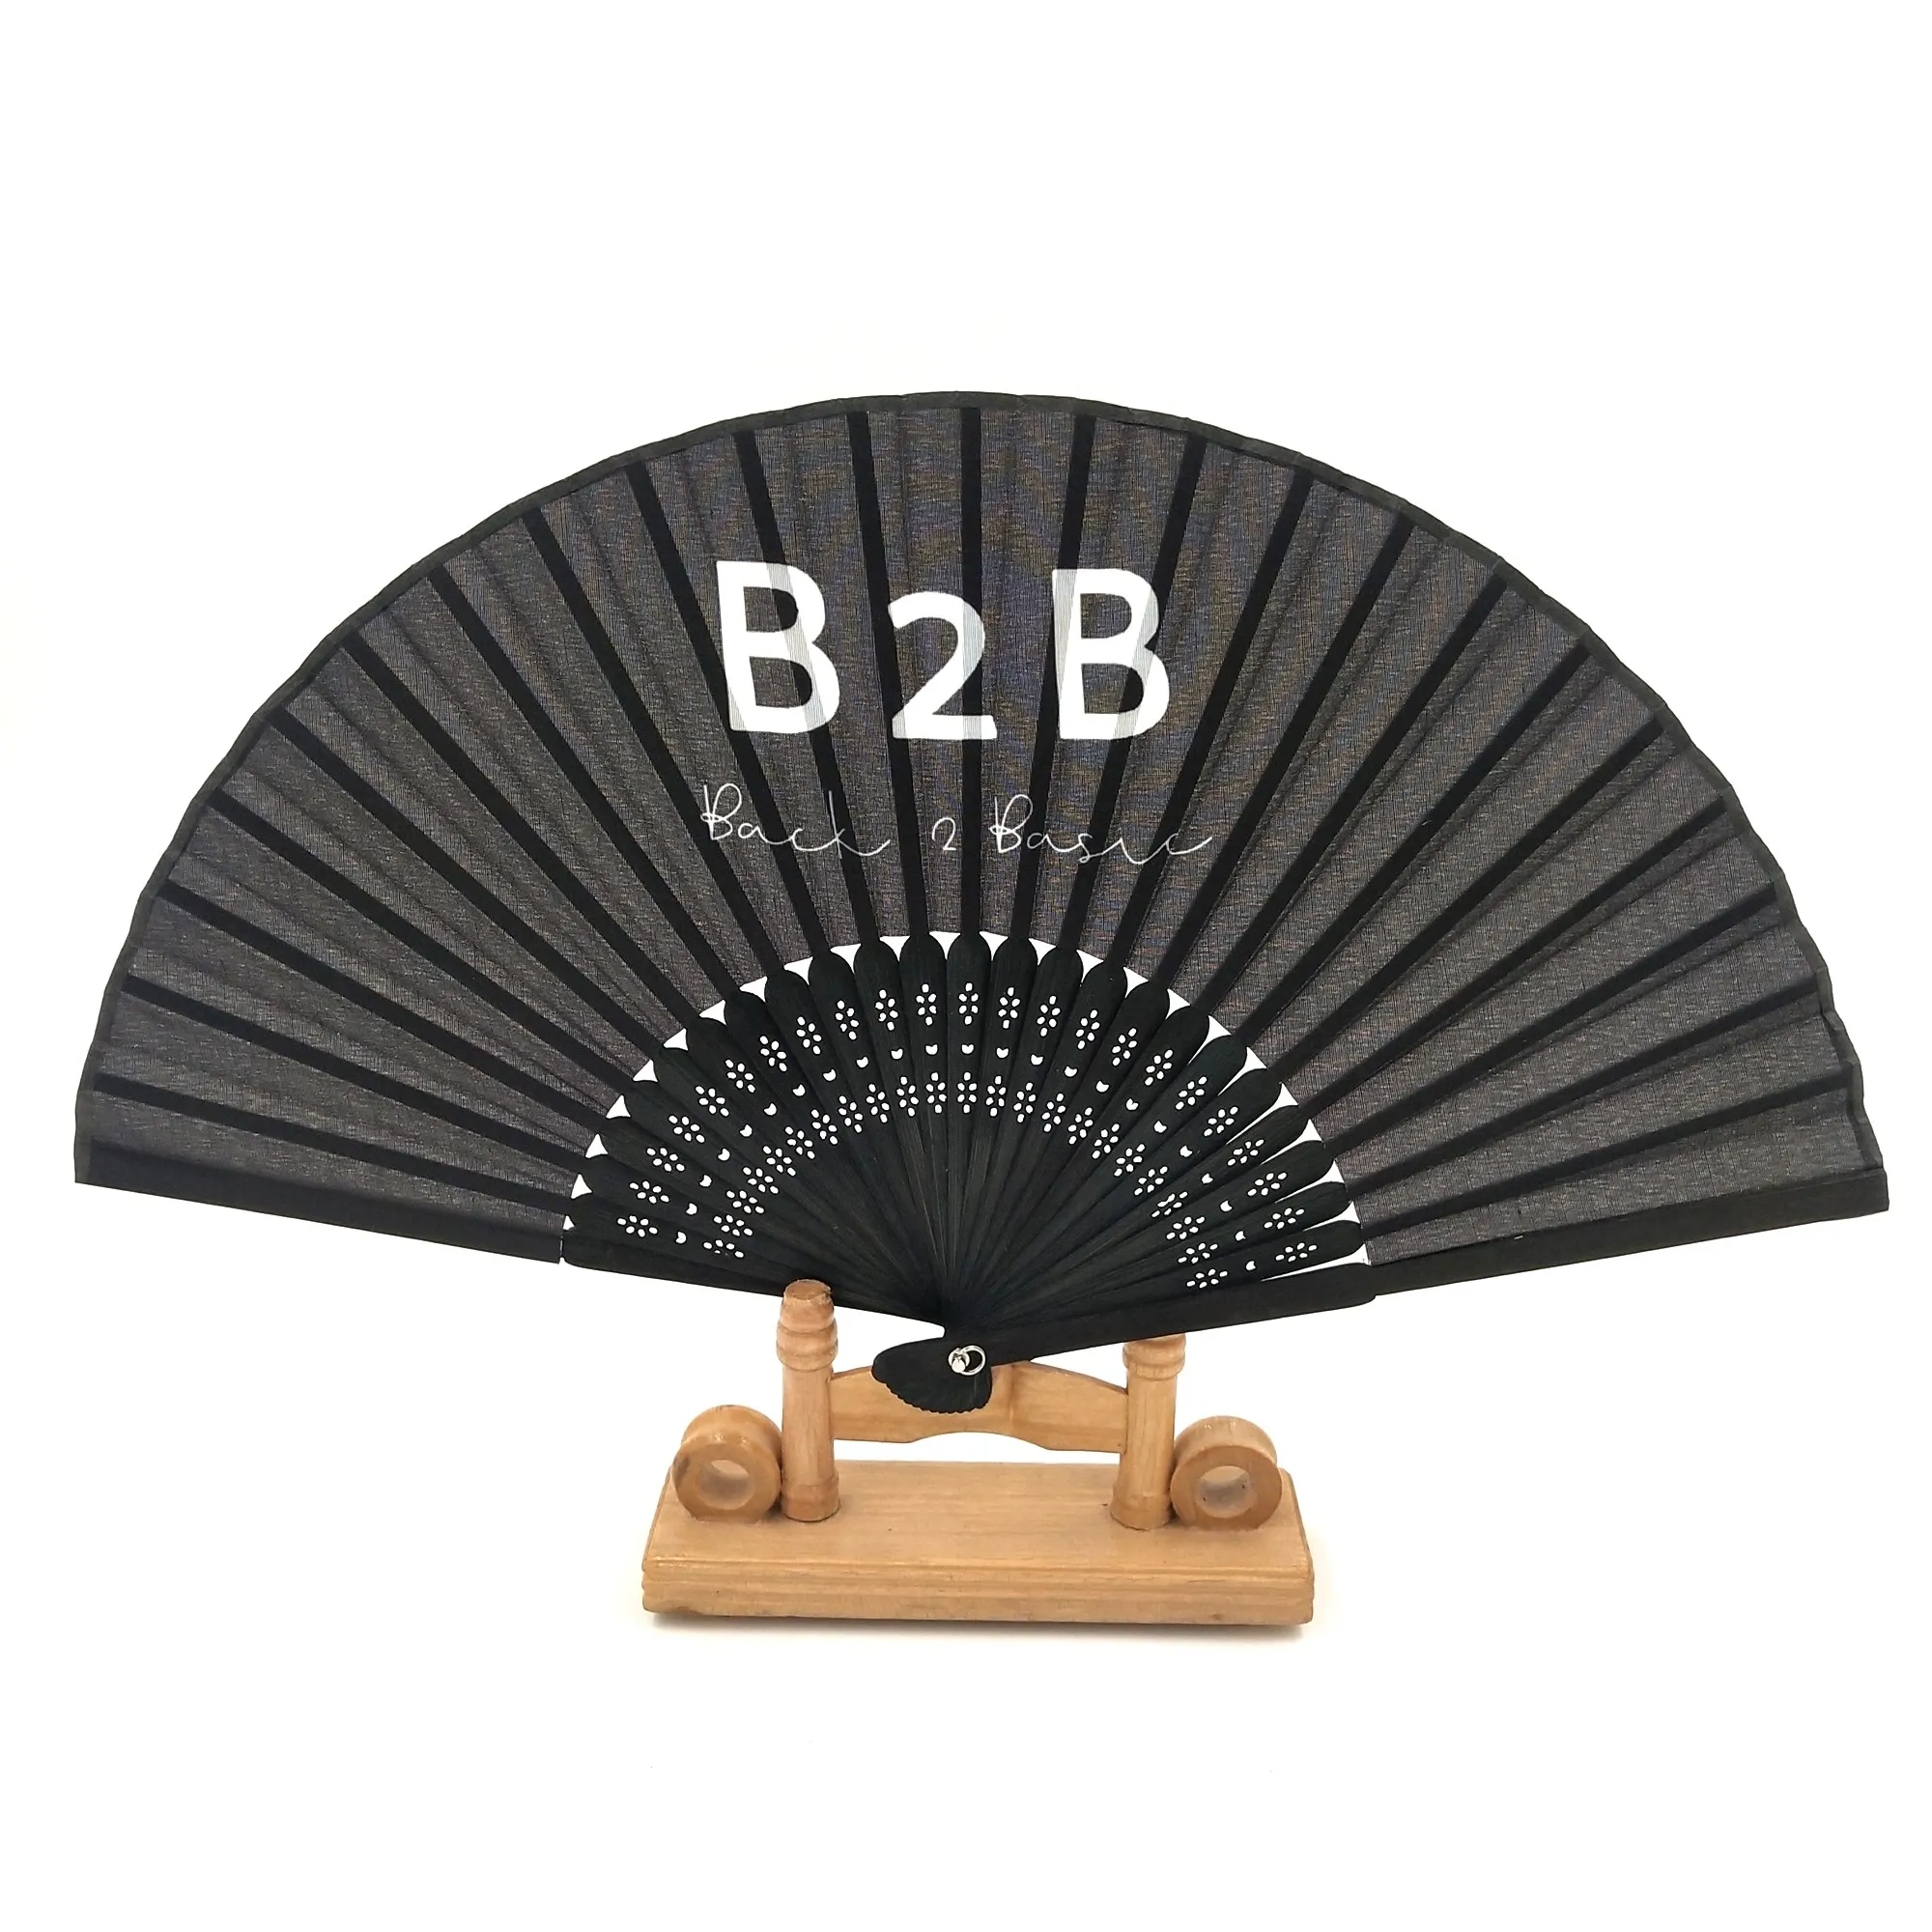 High Quality Bamboo Fabric Paper Fans Custom Hand Held fan for 2020 Navidad